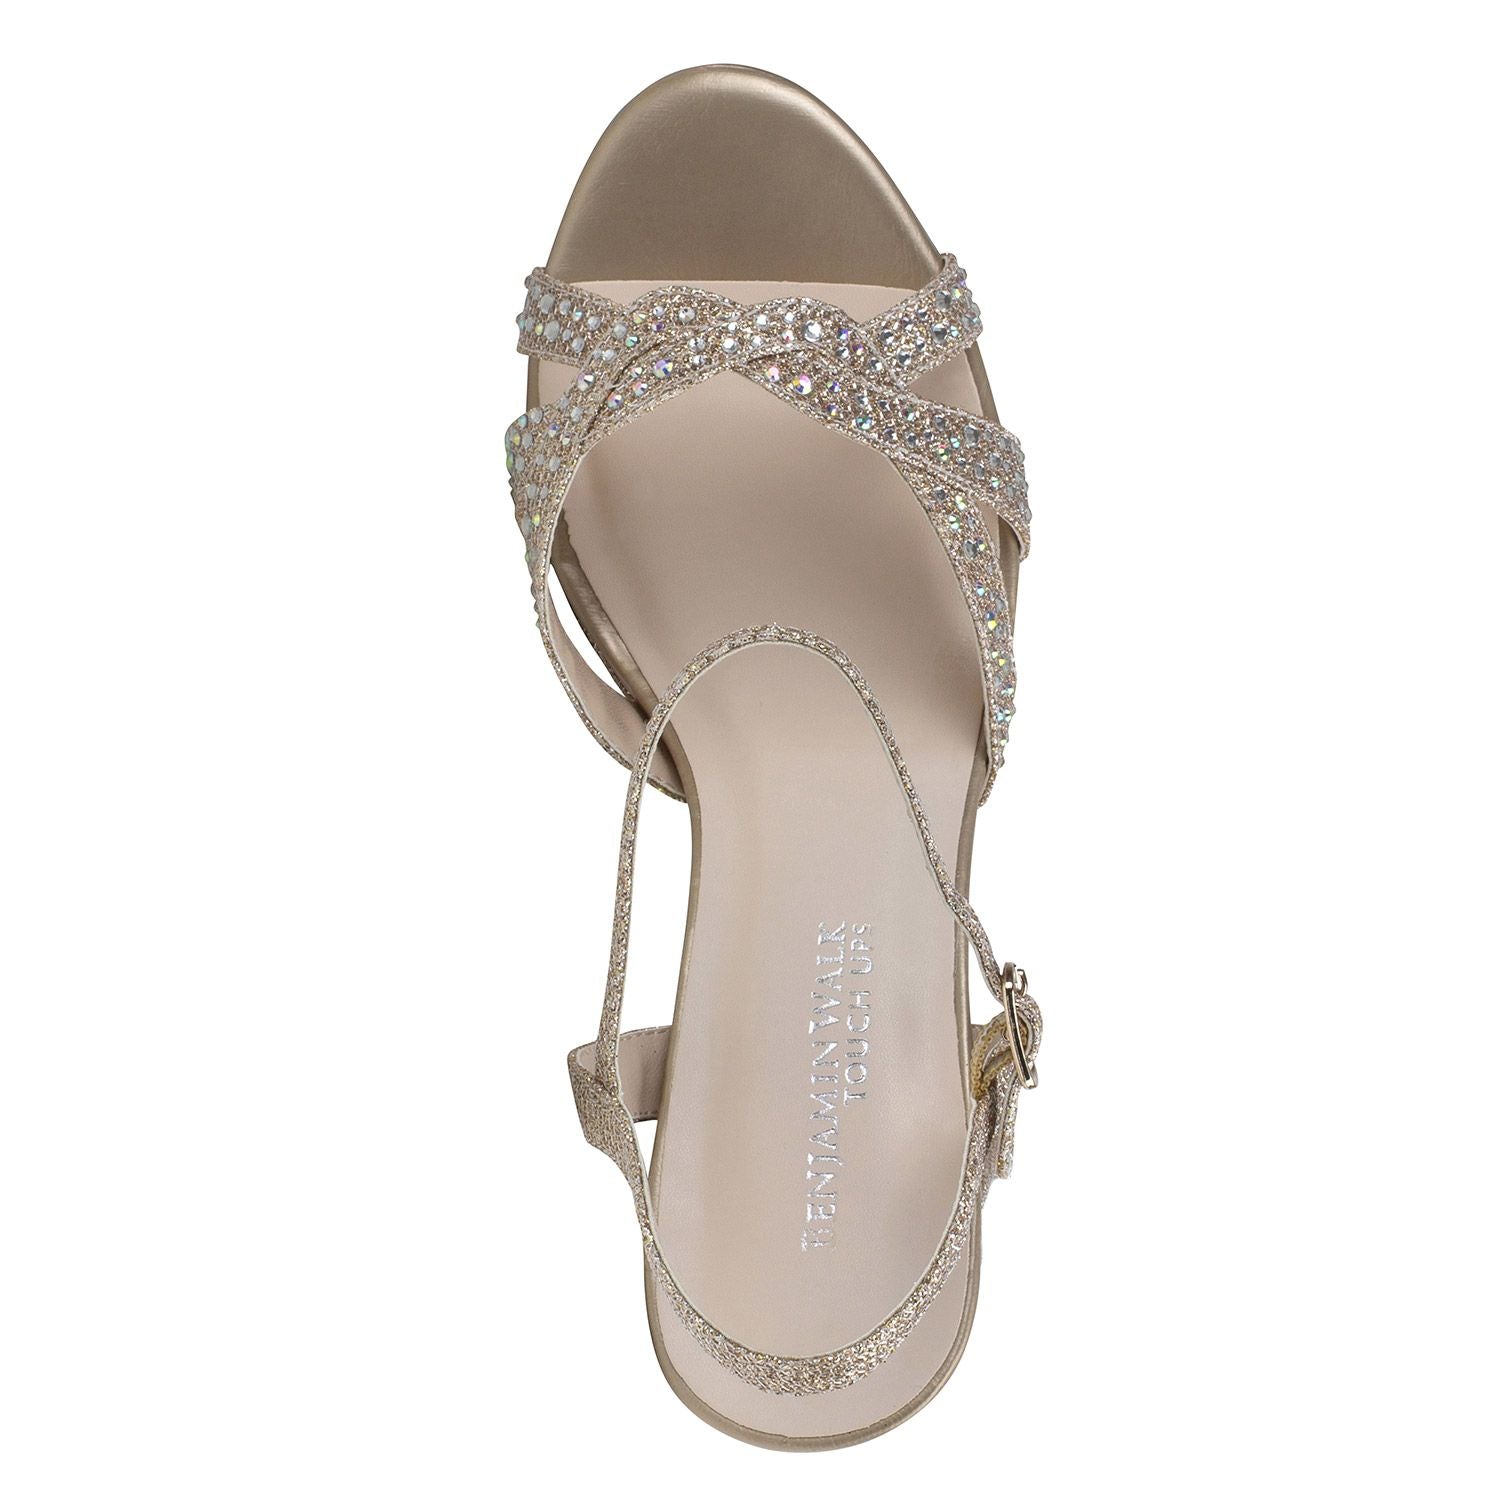 Overhead view of Champagne glitter platform shoe with 3.75 heel with open toe.